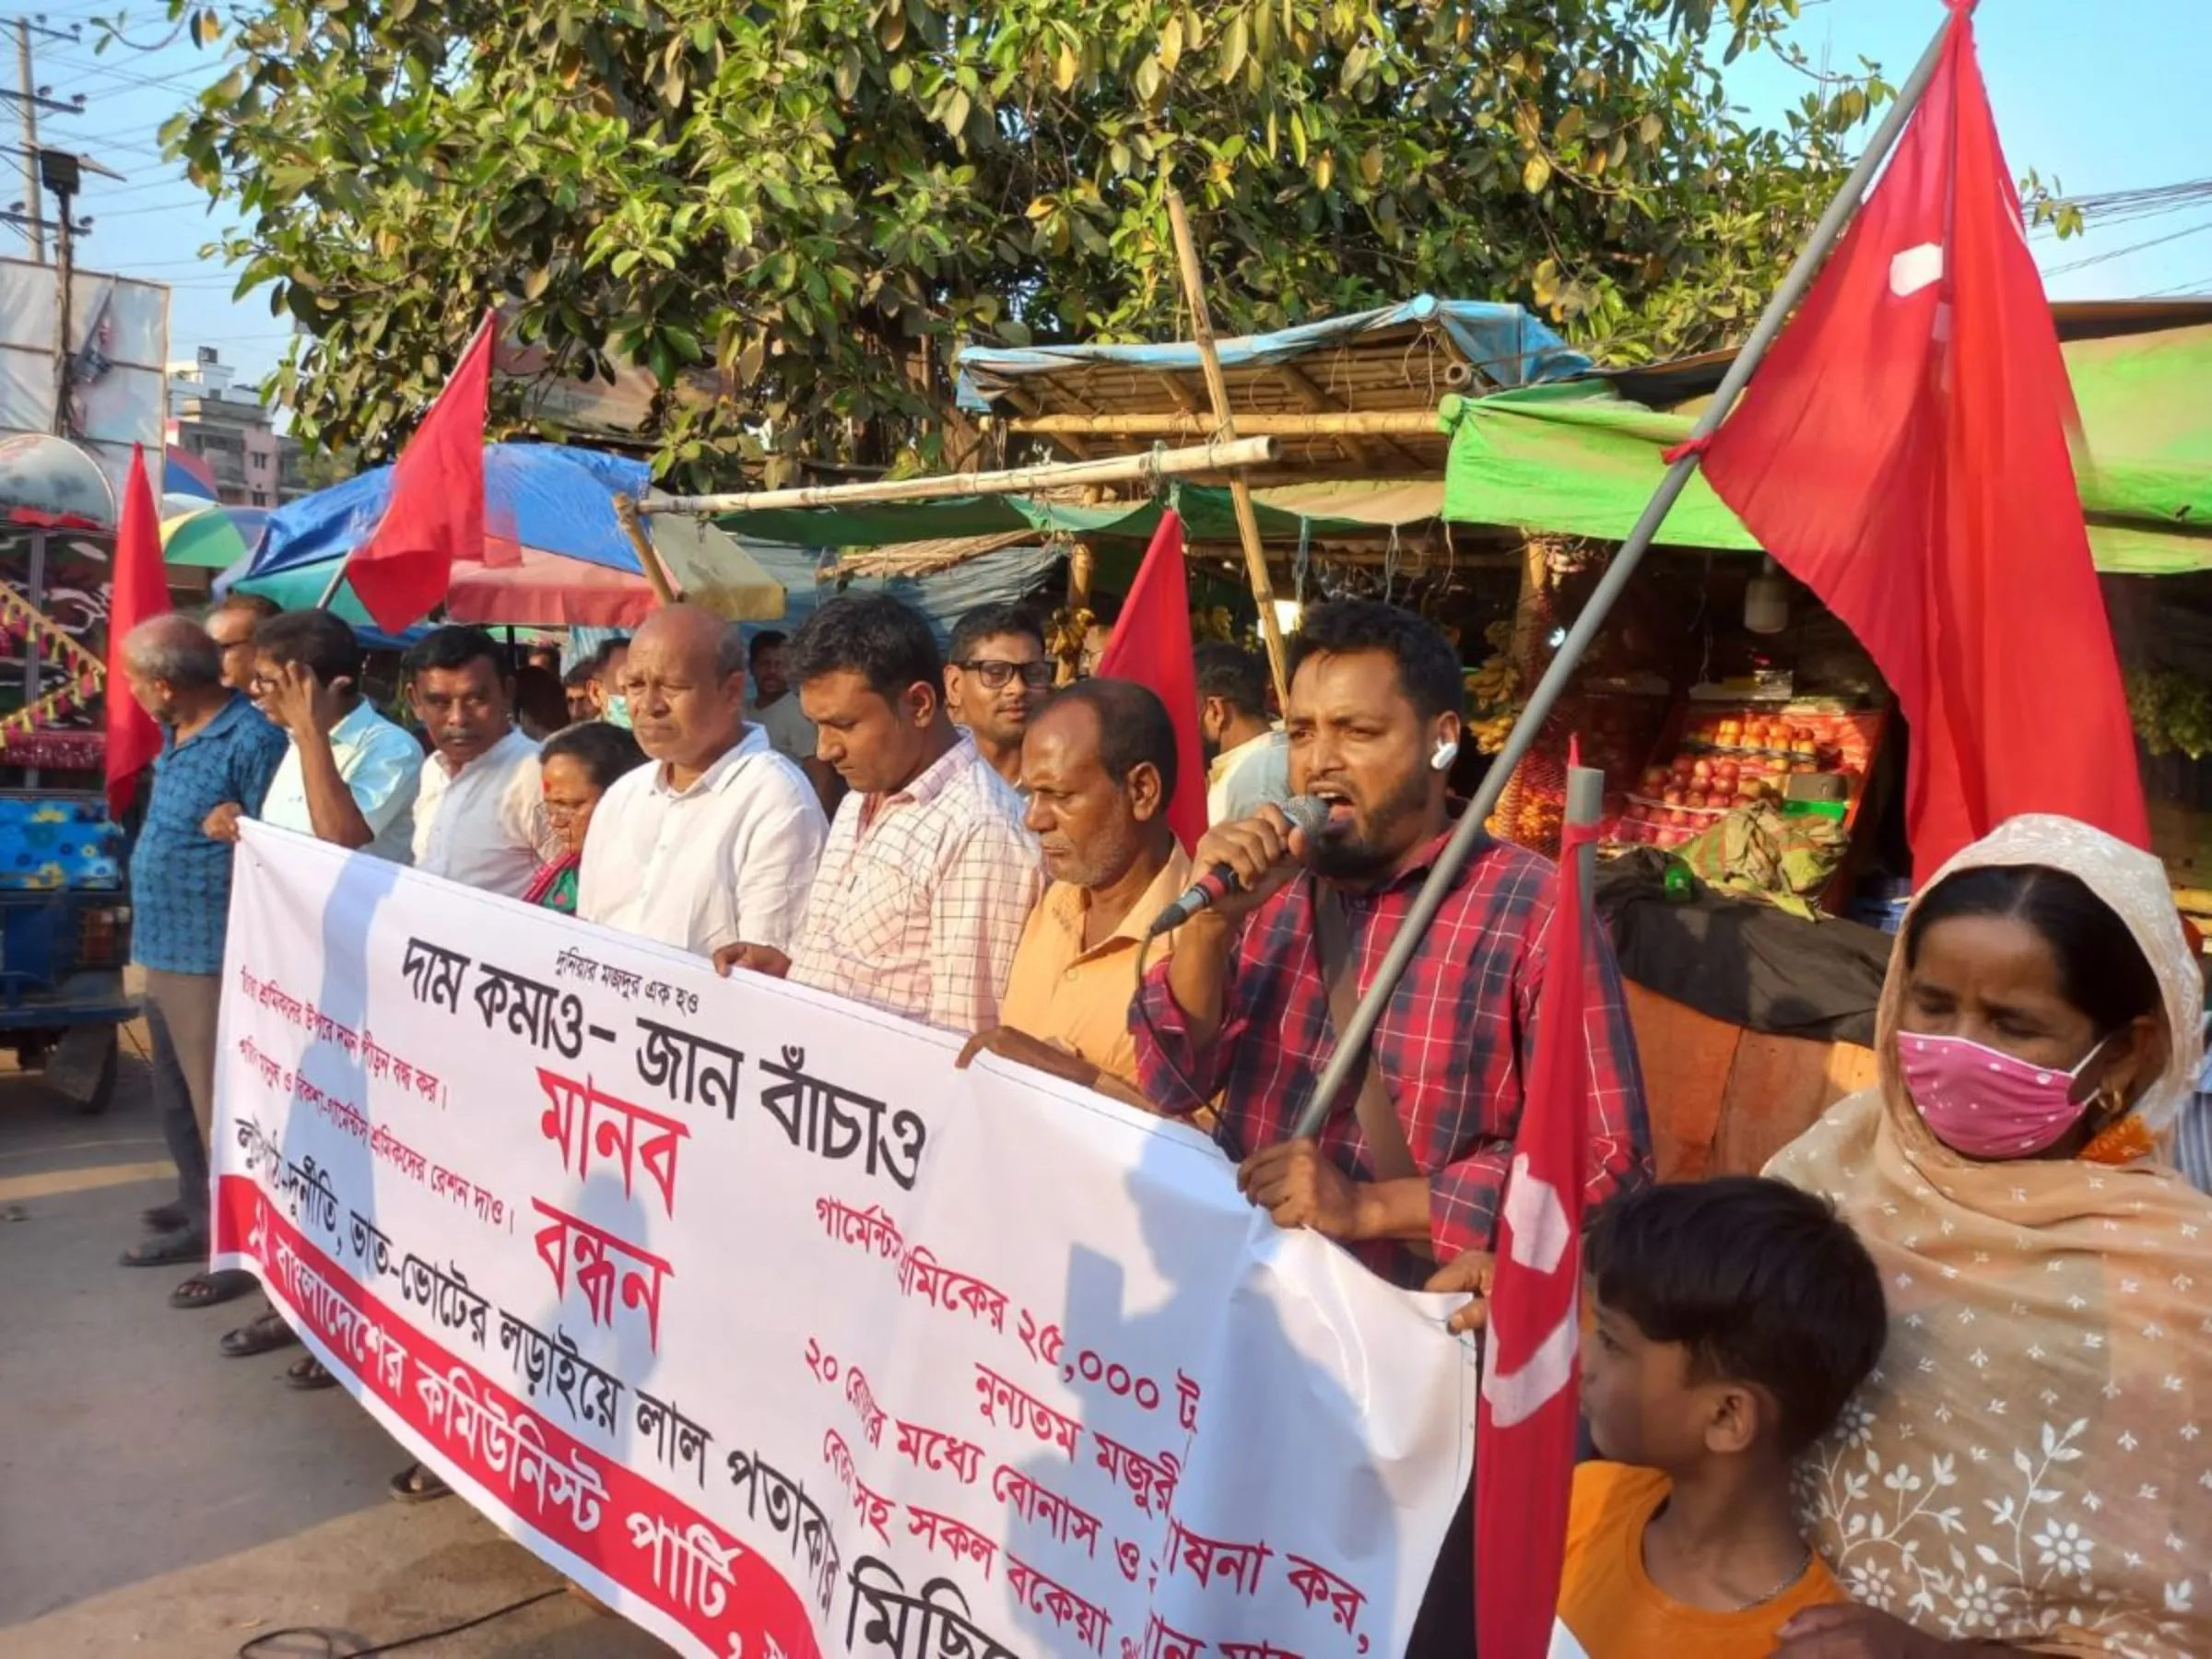 A workers' rally at Sabhar, a key industrial district in the outskirts of Dhaka, demands minimum wage raise for garment workers, Dhaka, April 10, 2023